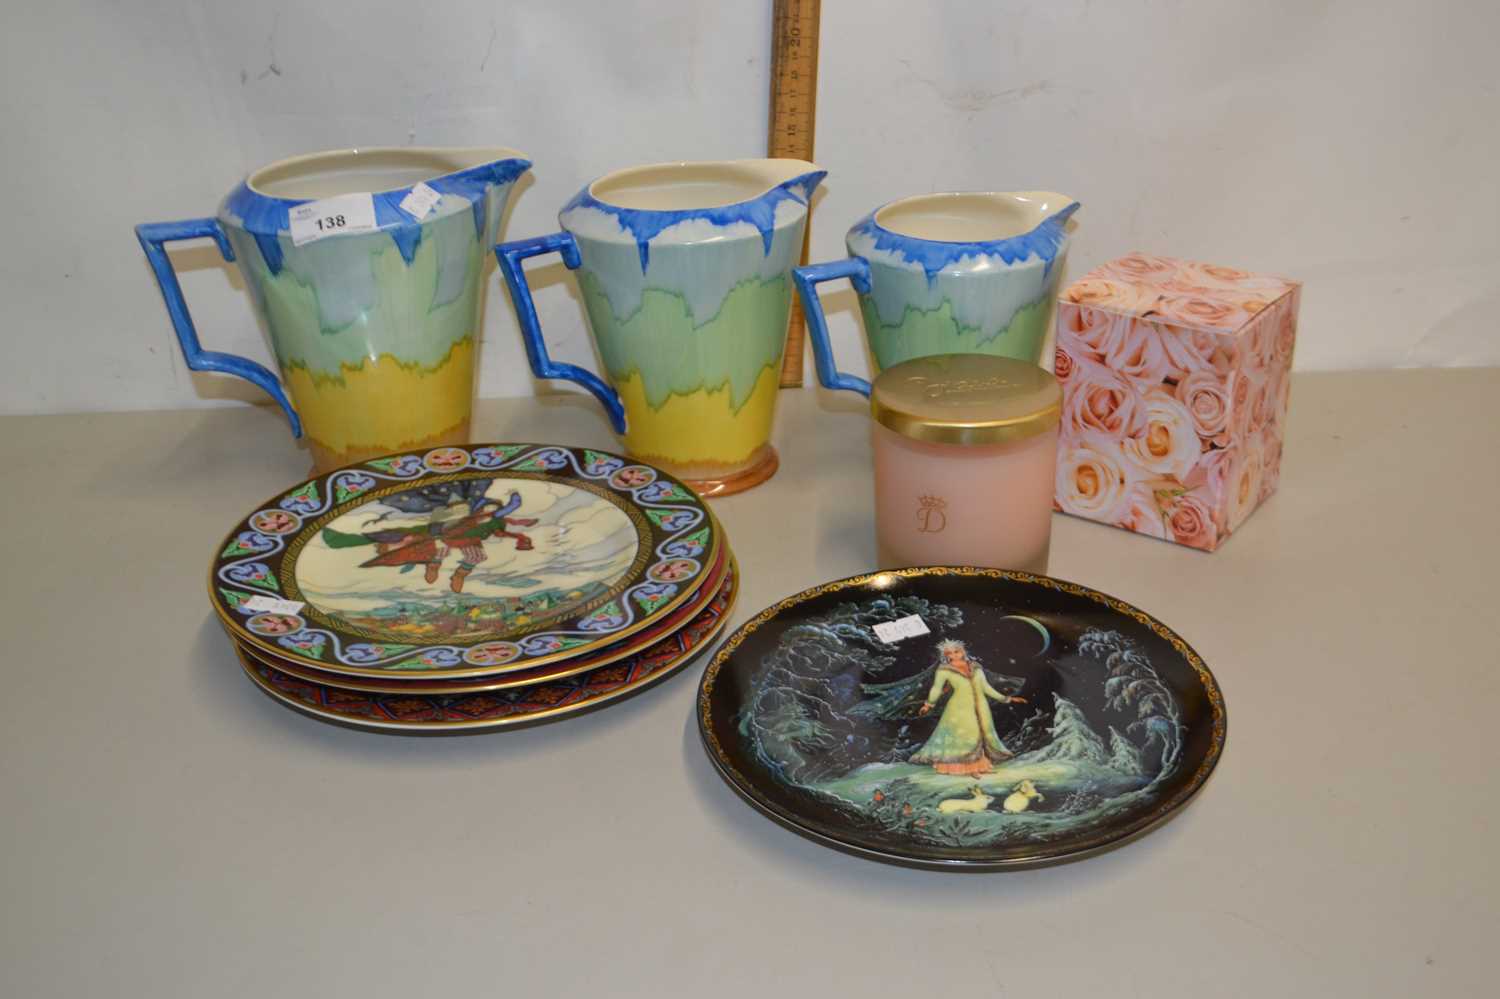 A graduated set of three Hancocks ivy ware jugs together with various collectors plates and other